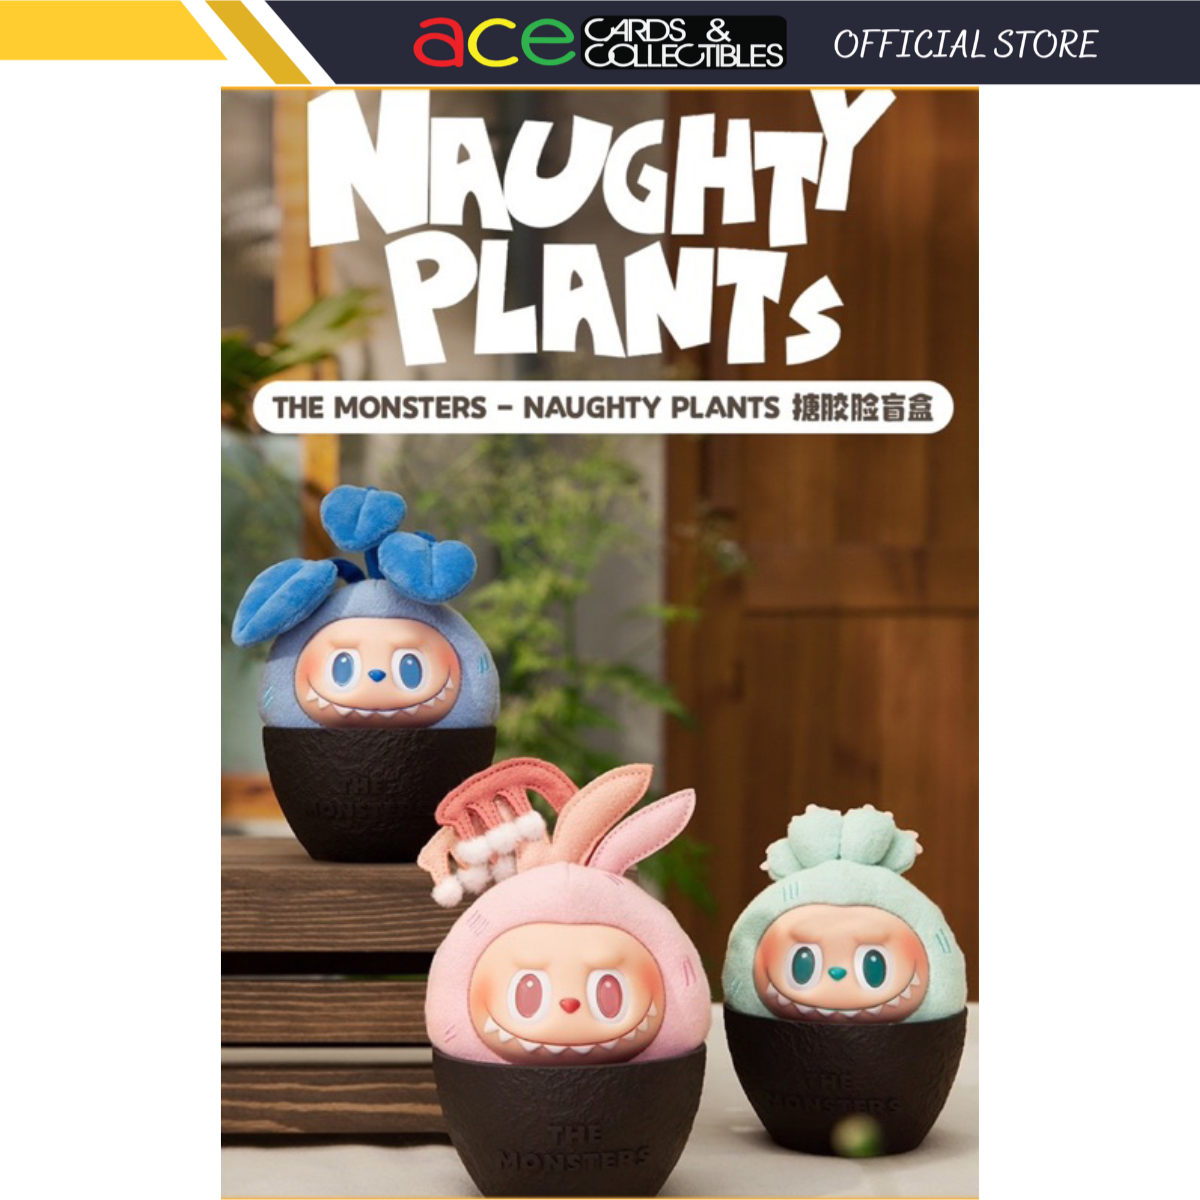 POP MART The Monsters Naughty Plants Vinyl Face Series-Single Box (Random)-Pop Mart-Ace Cards & Collectibles